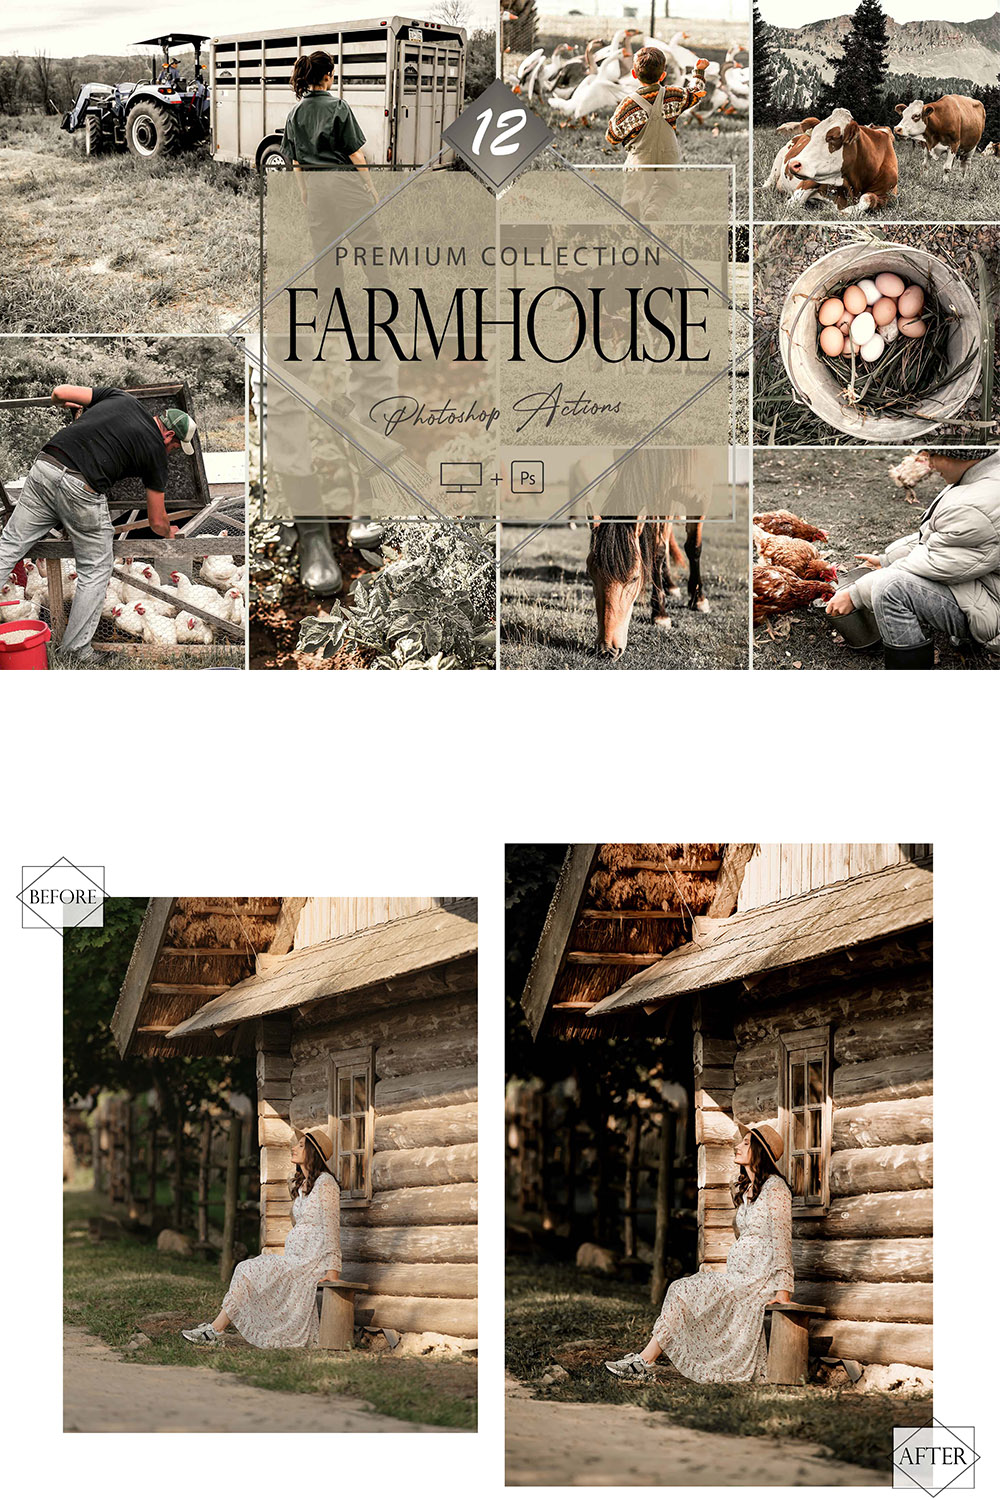 12 Photoshop Actions, Farmhouse Ps Action, Farmstead Cozy ACR Preset, Green Filter, Lifestyle Theme For Instagram, Avocado Moody, Warm Portrait pinterest preview image.